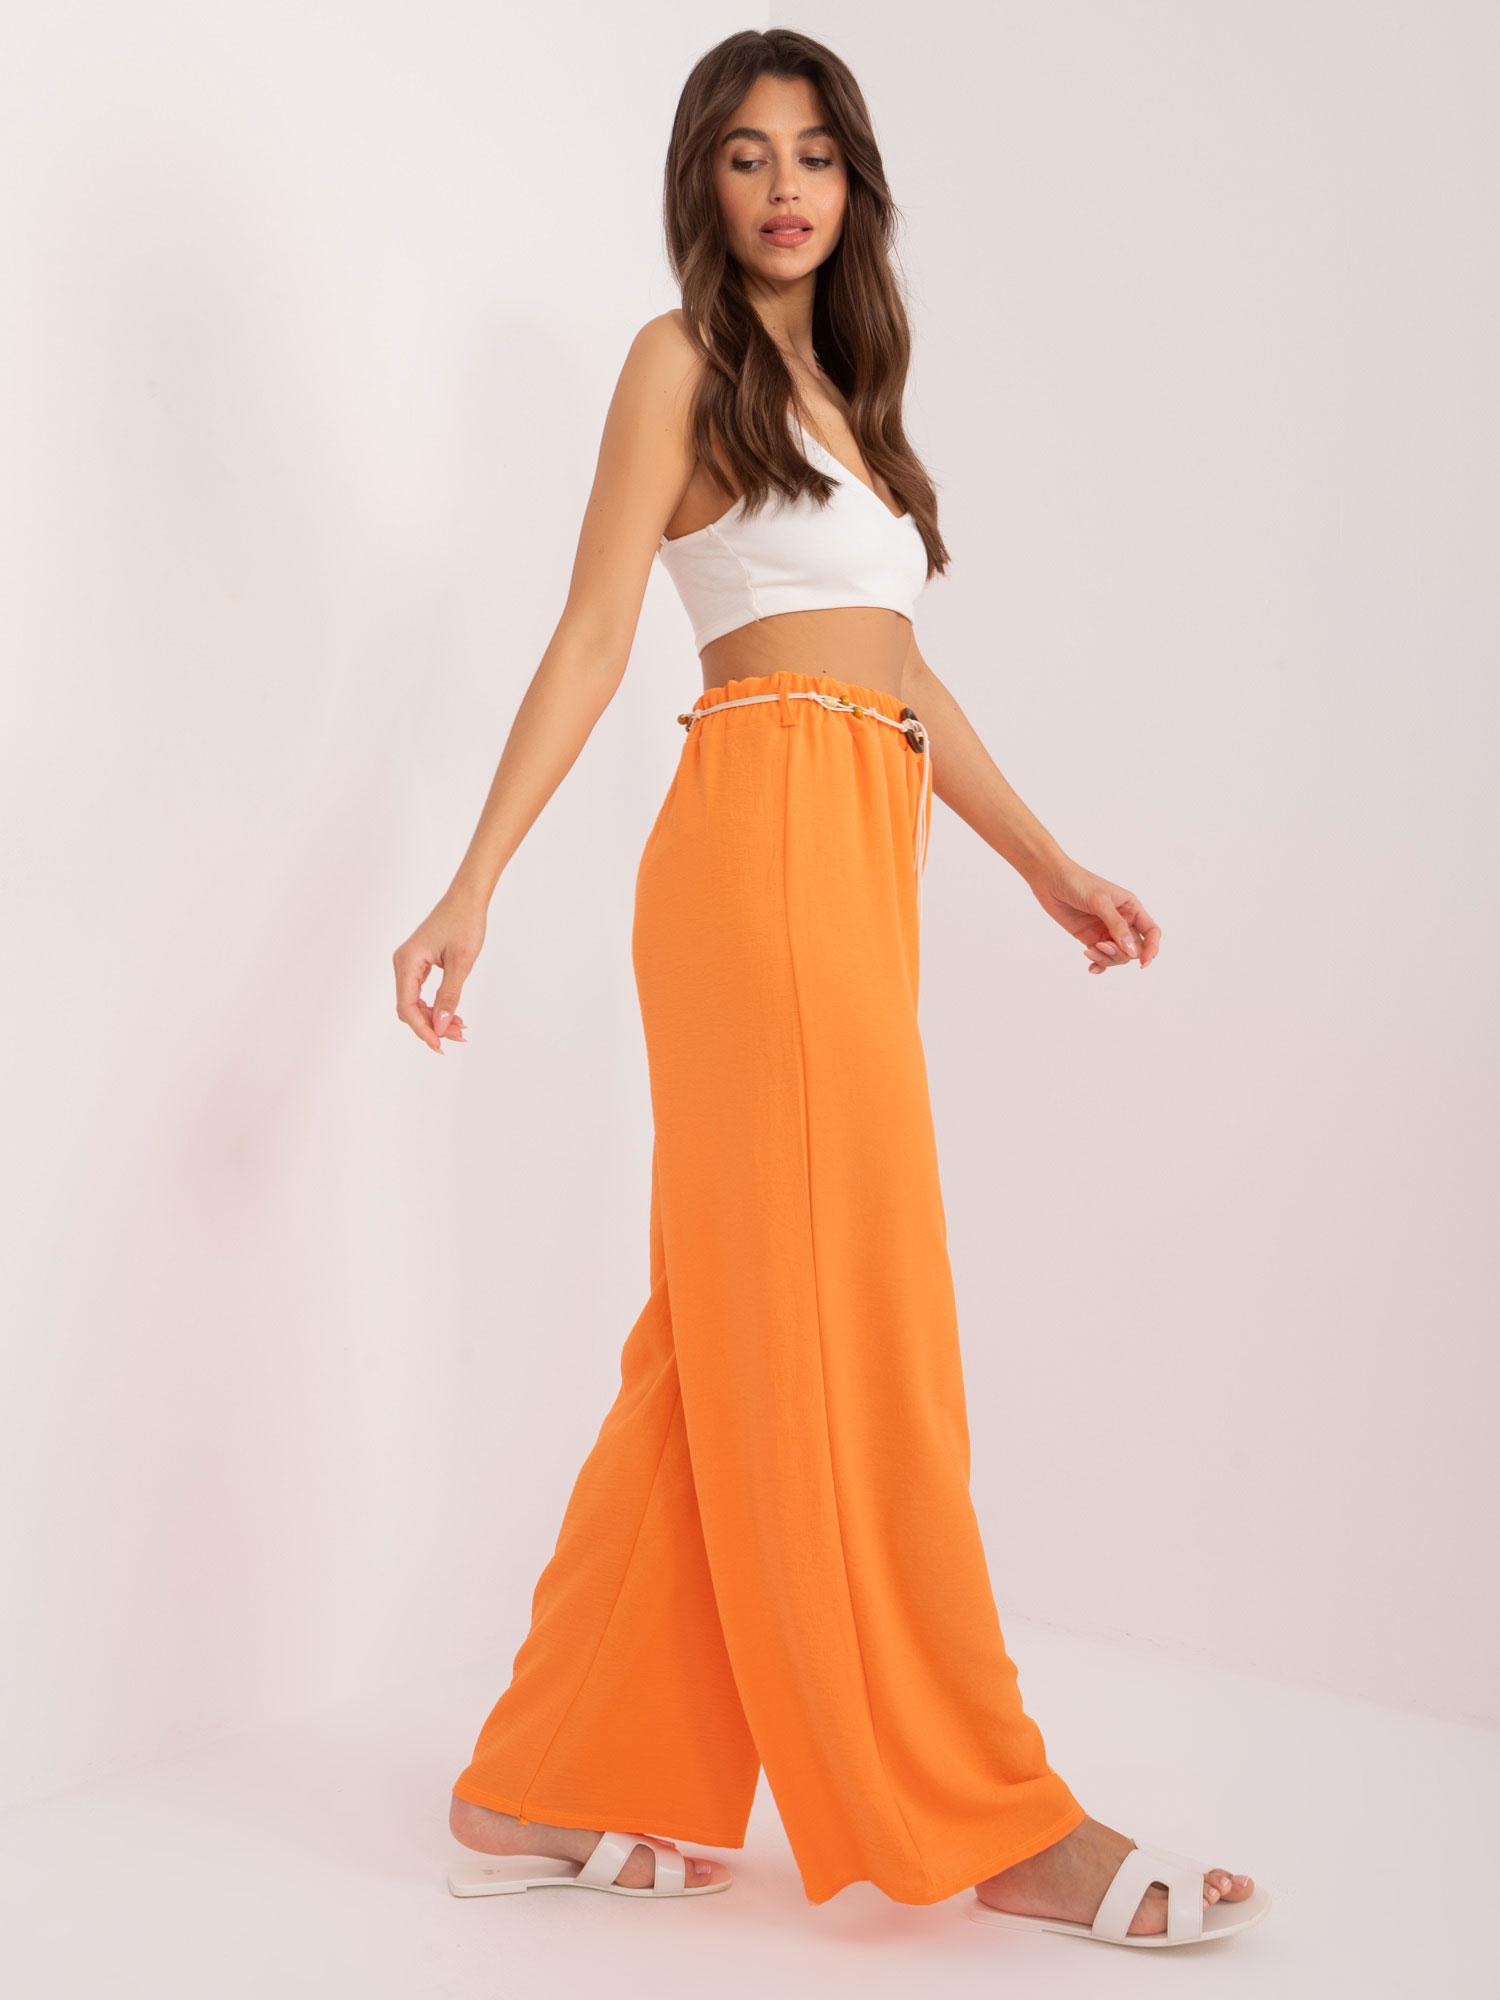 Orange trousers made of straight fabric